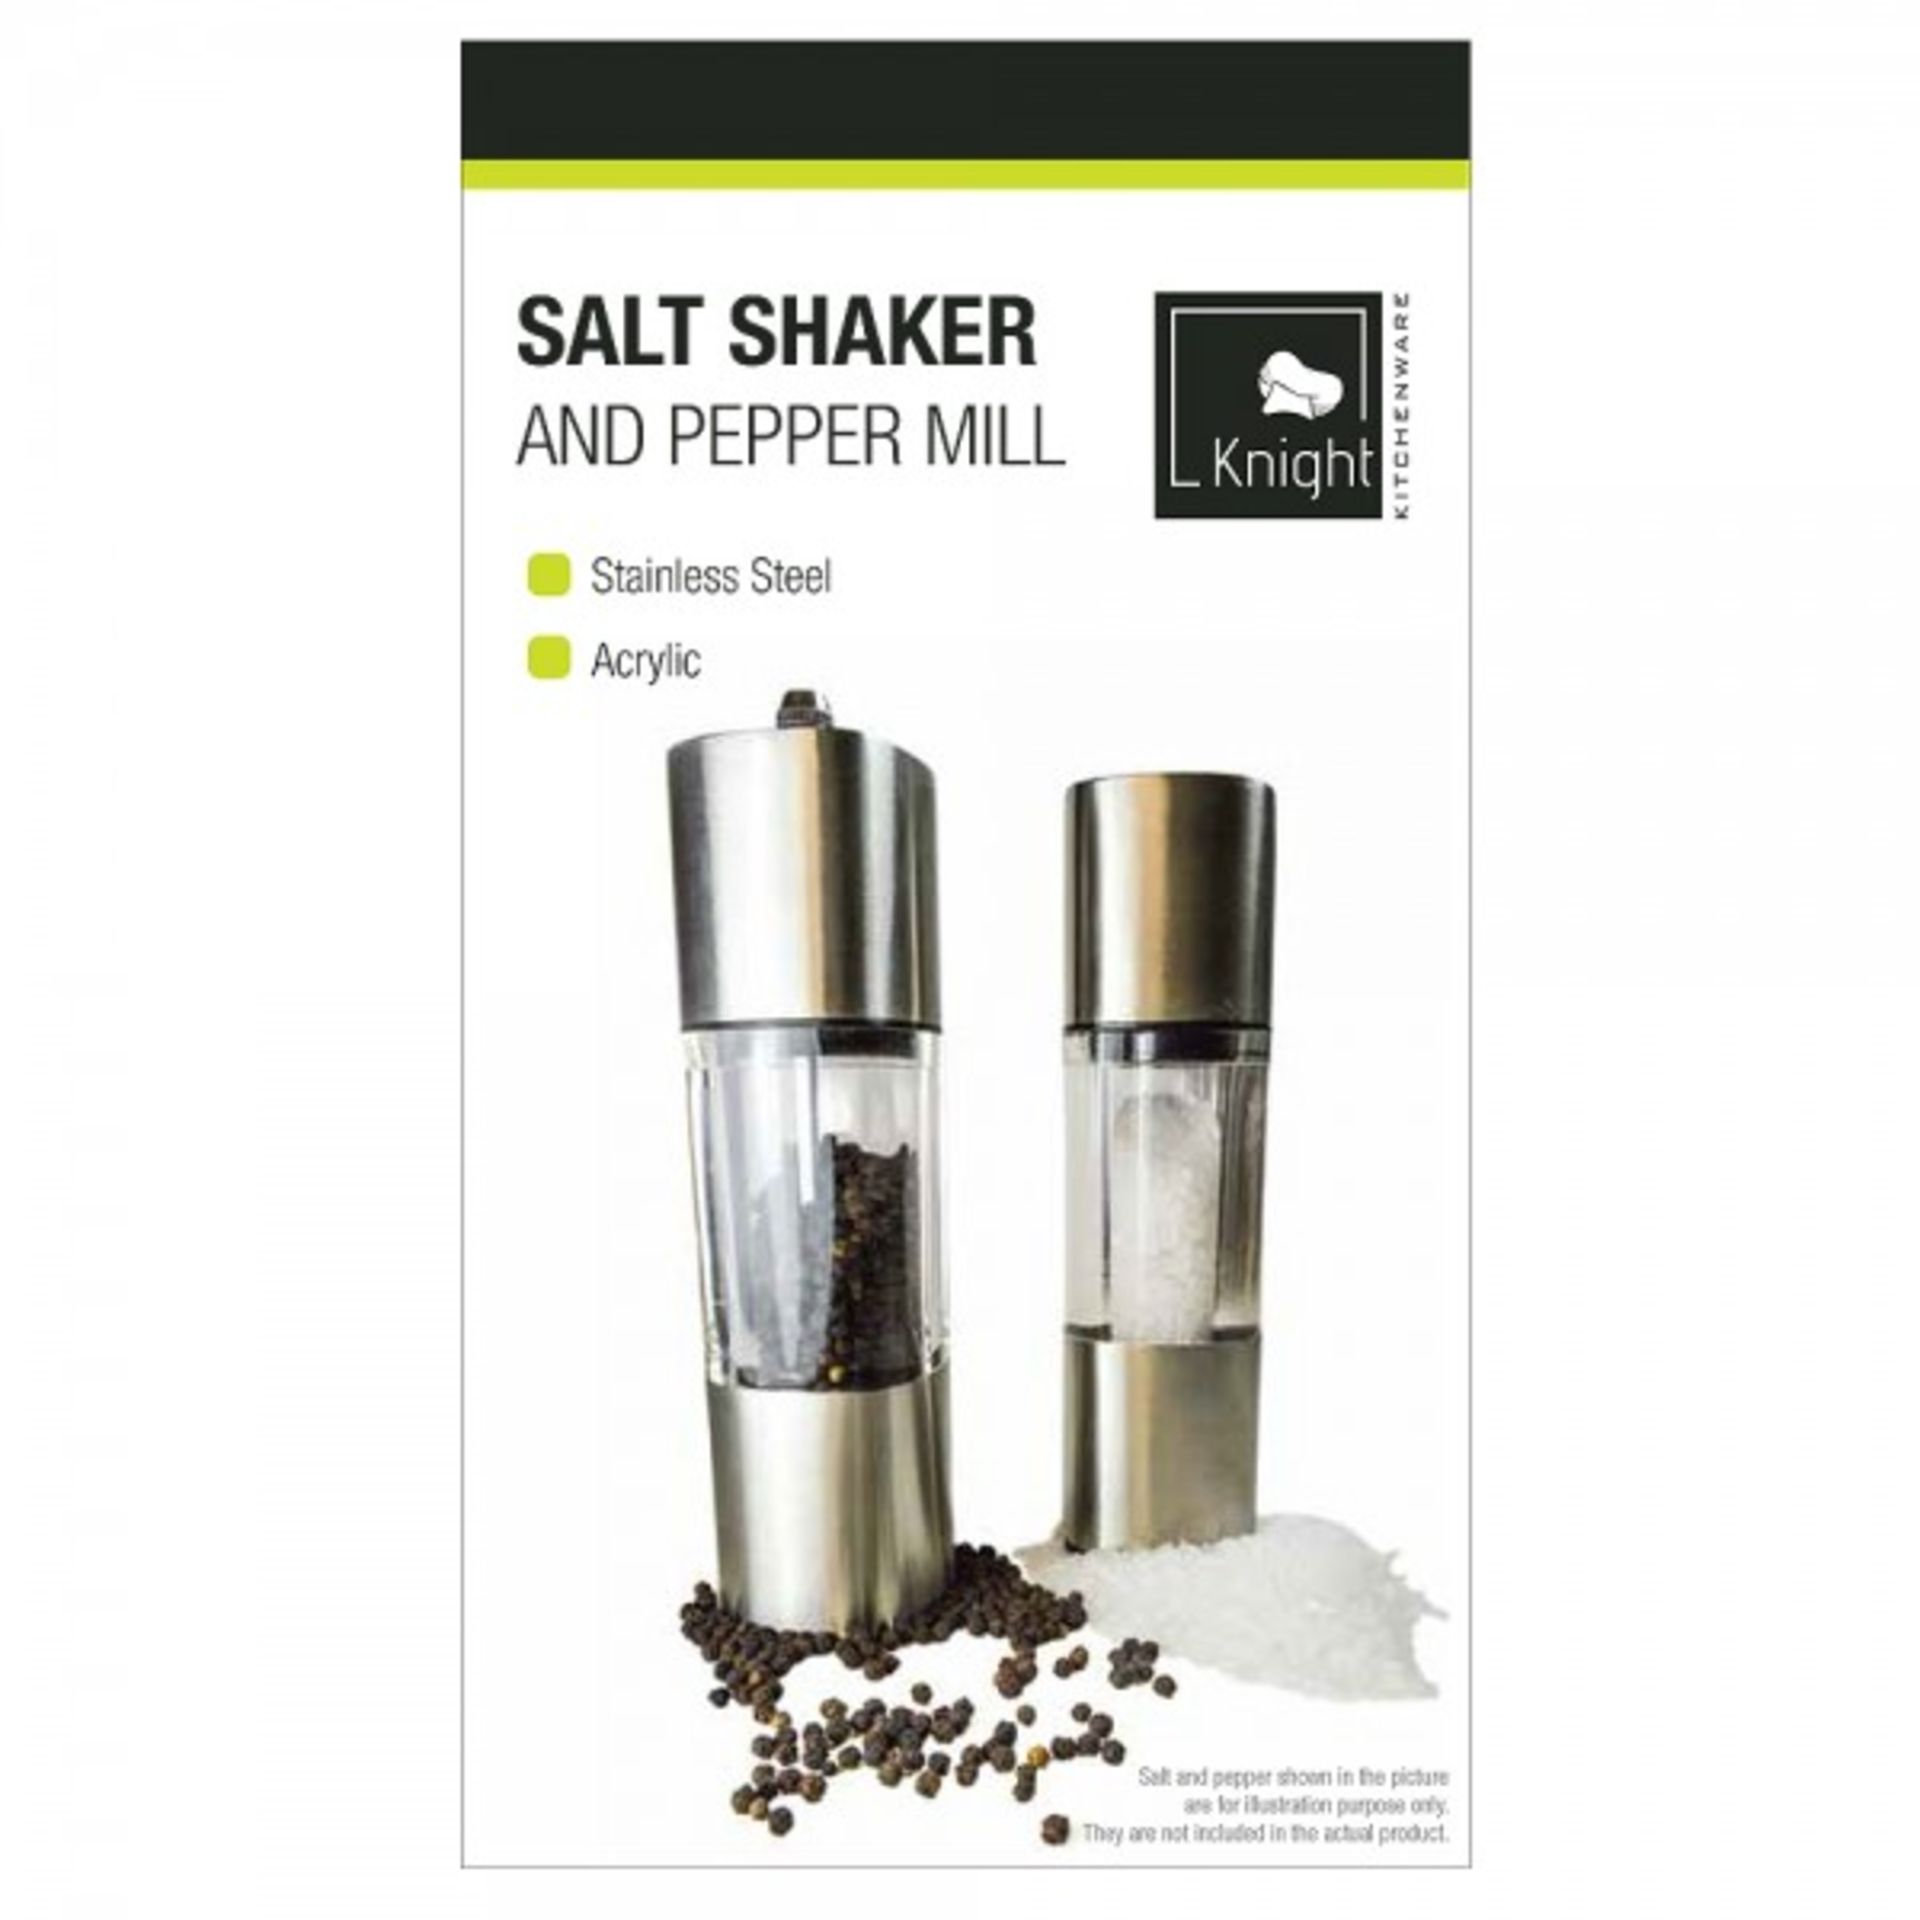 V Brand New Stainless Steel Salt & Pepper Mill X 2 YOUR BID PRICE TO BE MULTIPLIED BY TWO